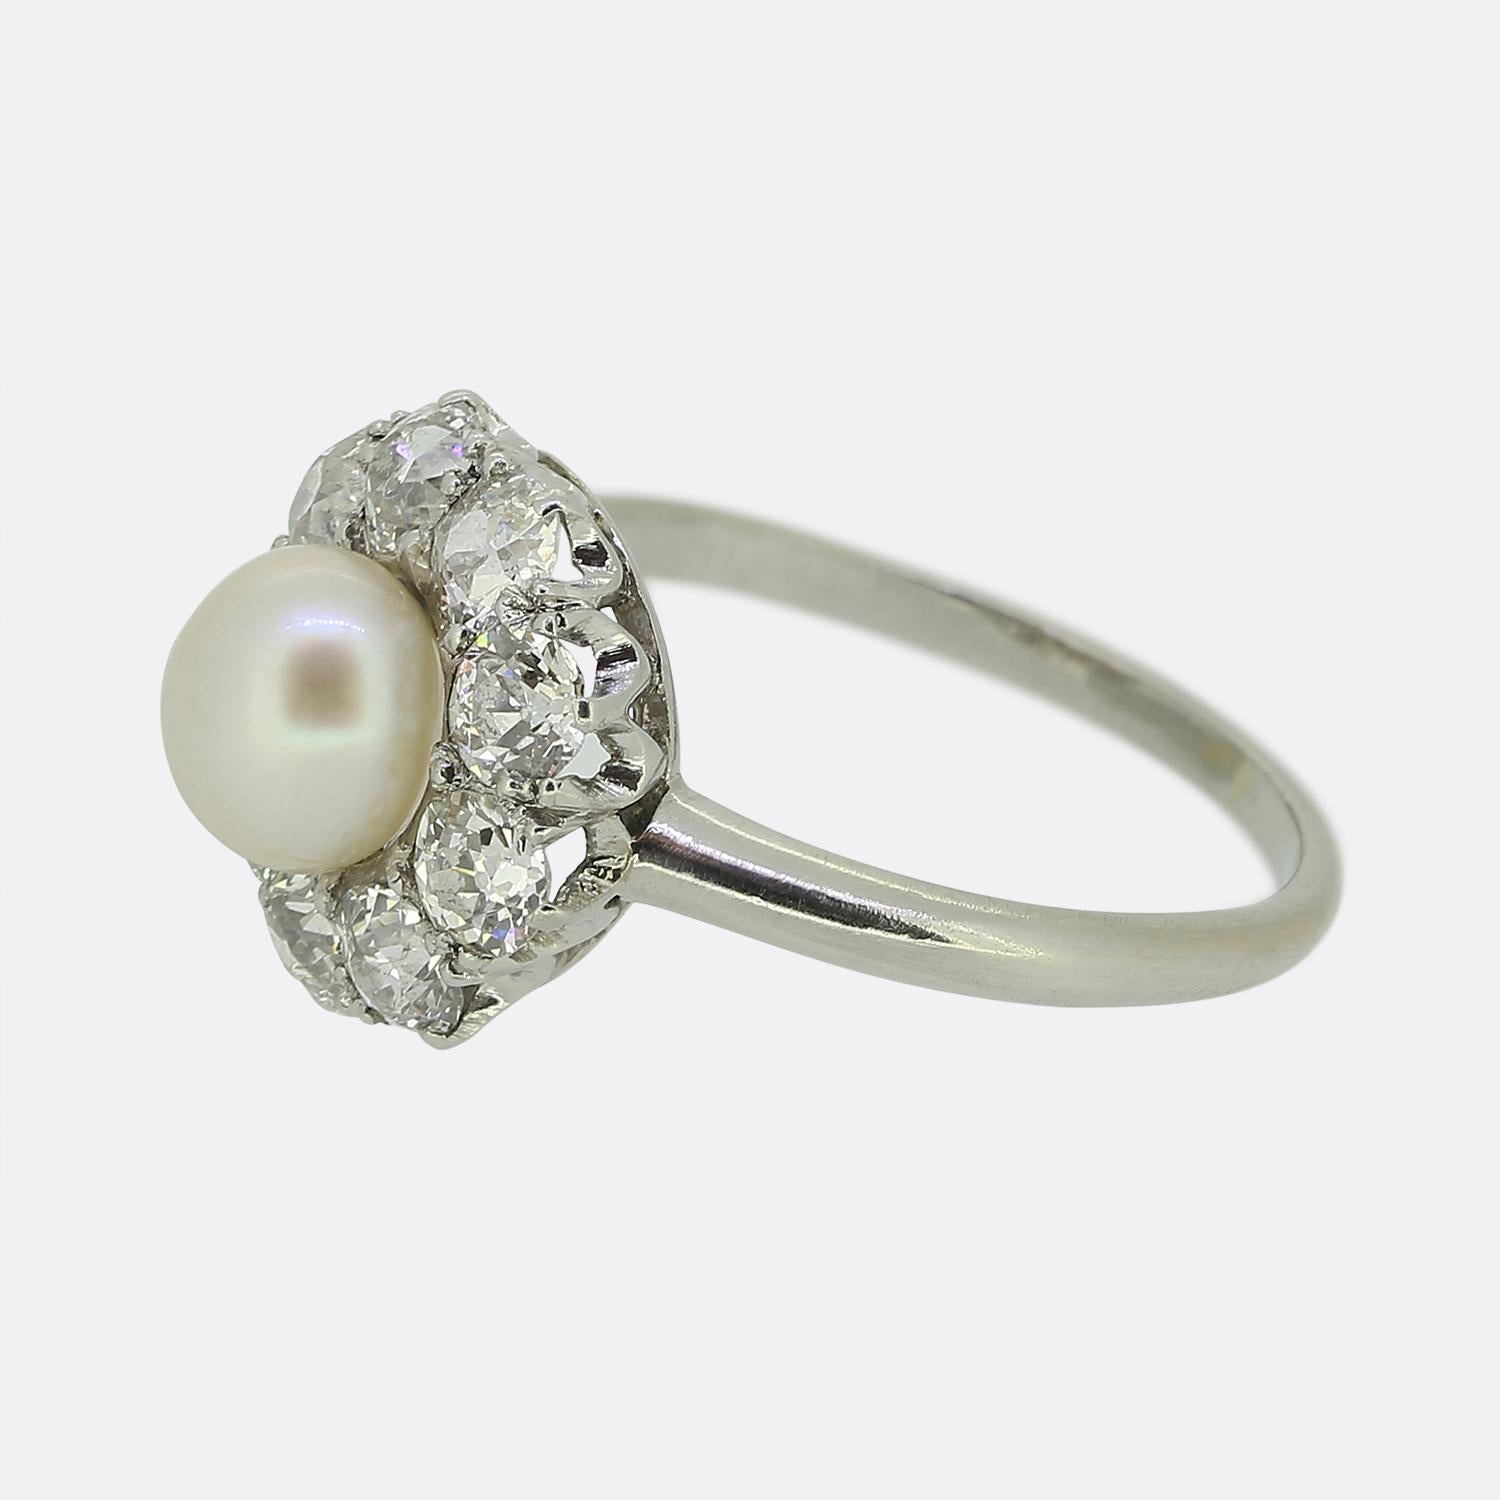 Here we have a gorgeous pearl and diamond cluster ring from the early stages of the 20th century. A round natural white pearl displaying a lovely level of lustre sits at the centre of the face and is surrounded by well matched chunky old cut